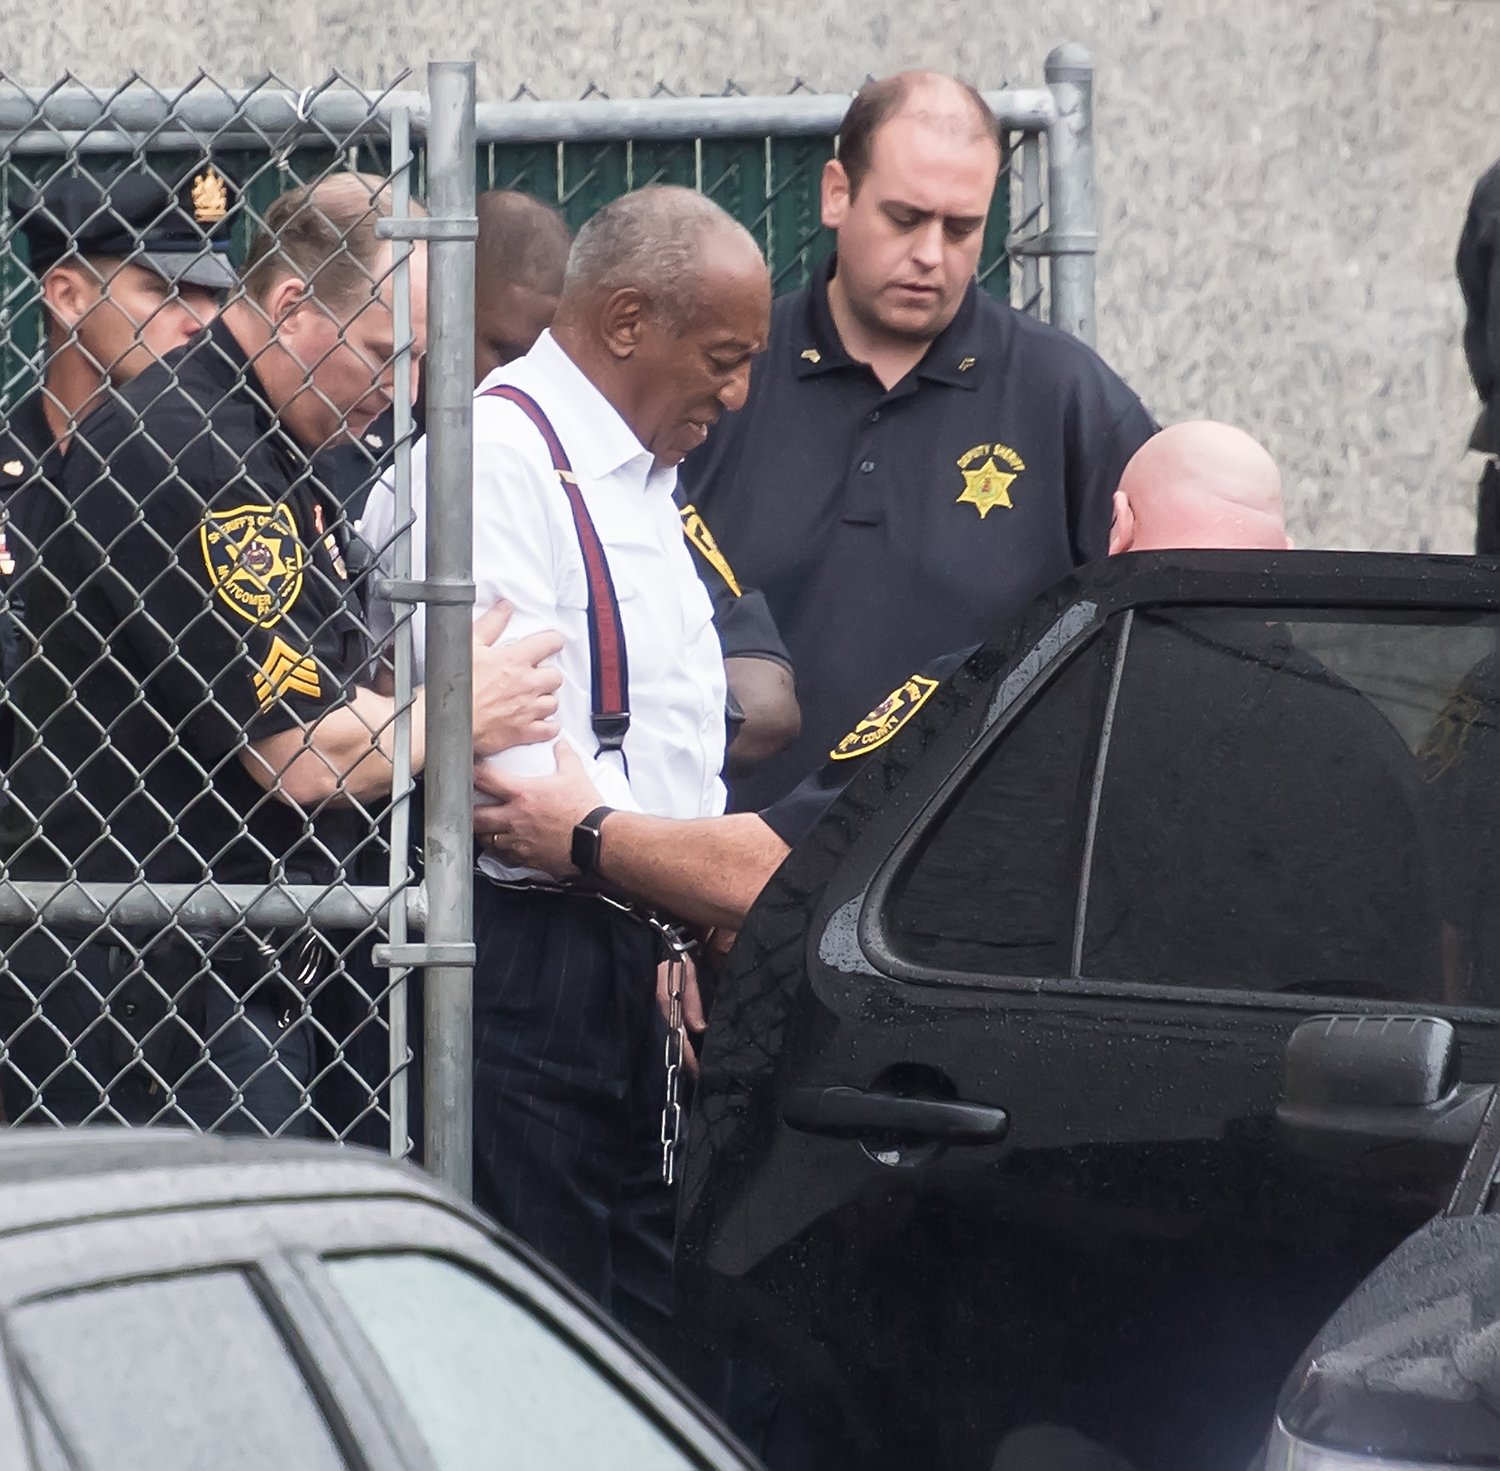 Comedian Bill Cosby being led into a vehicle wearing handcuffs | Photo: Getty Images